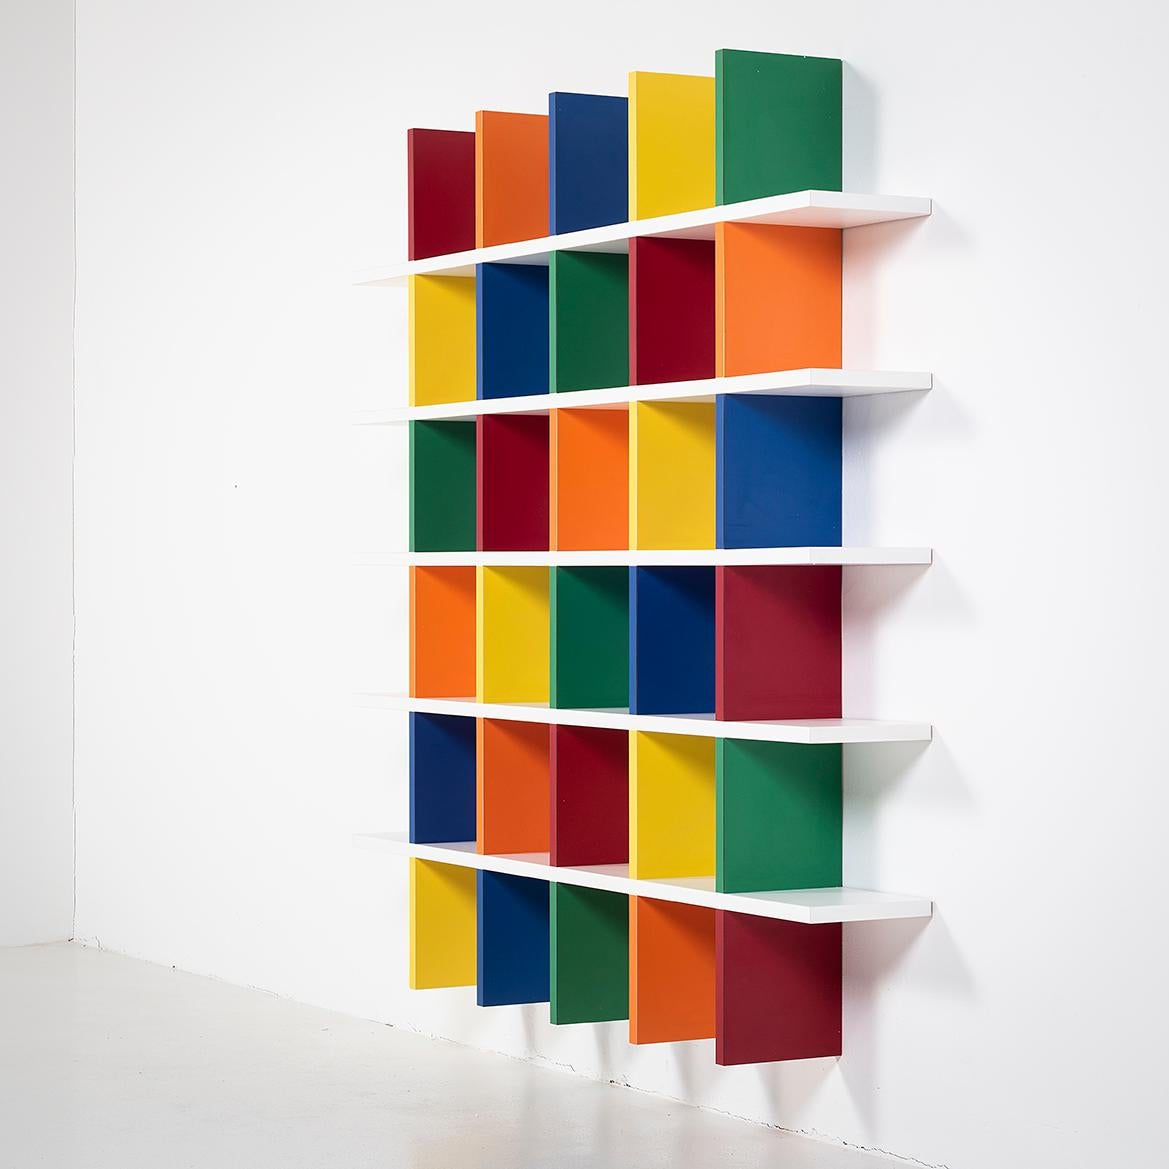 Designed by Shigery Uchida in 2000, SHELF 01 was part of a series shown in a exhibition that toured Tokyo, Nagoy and Sapporo.

As furniture, the design is simple, yet colors give different expressions.  The random arrangement of colors serves as a